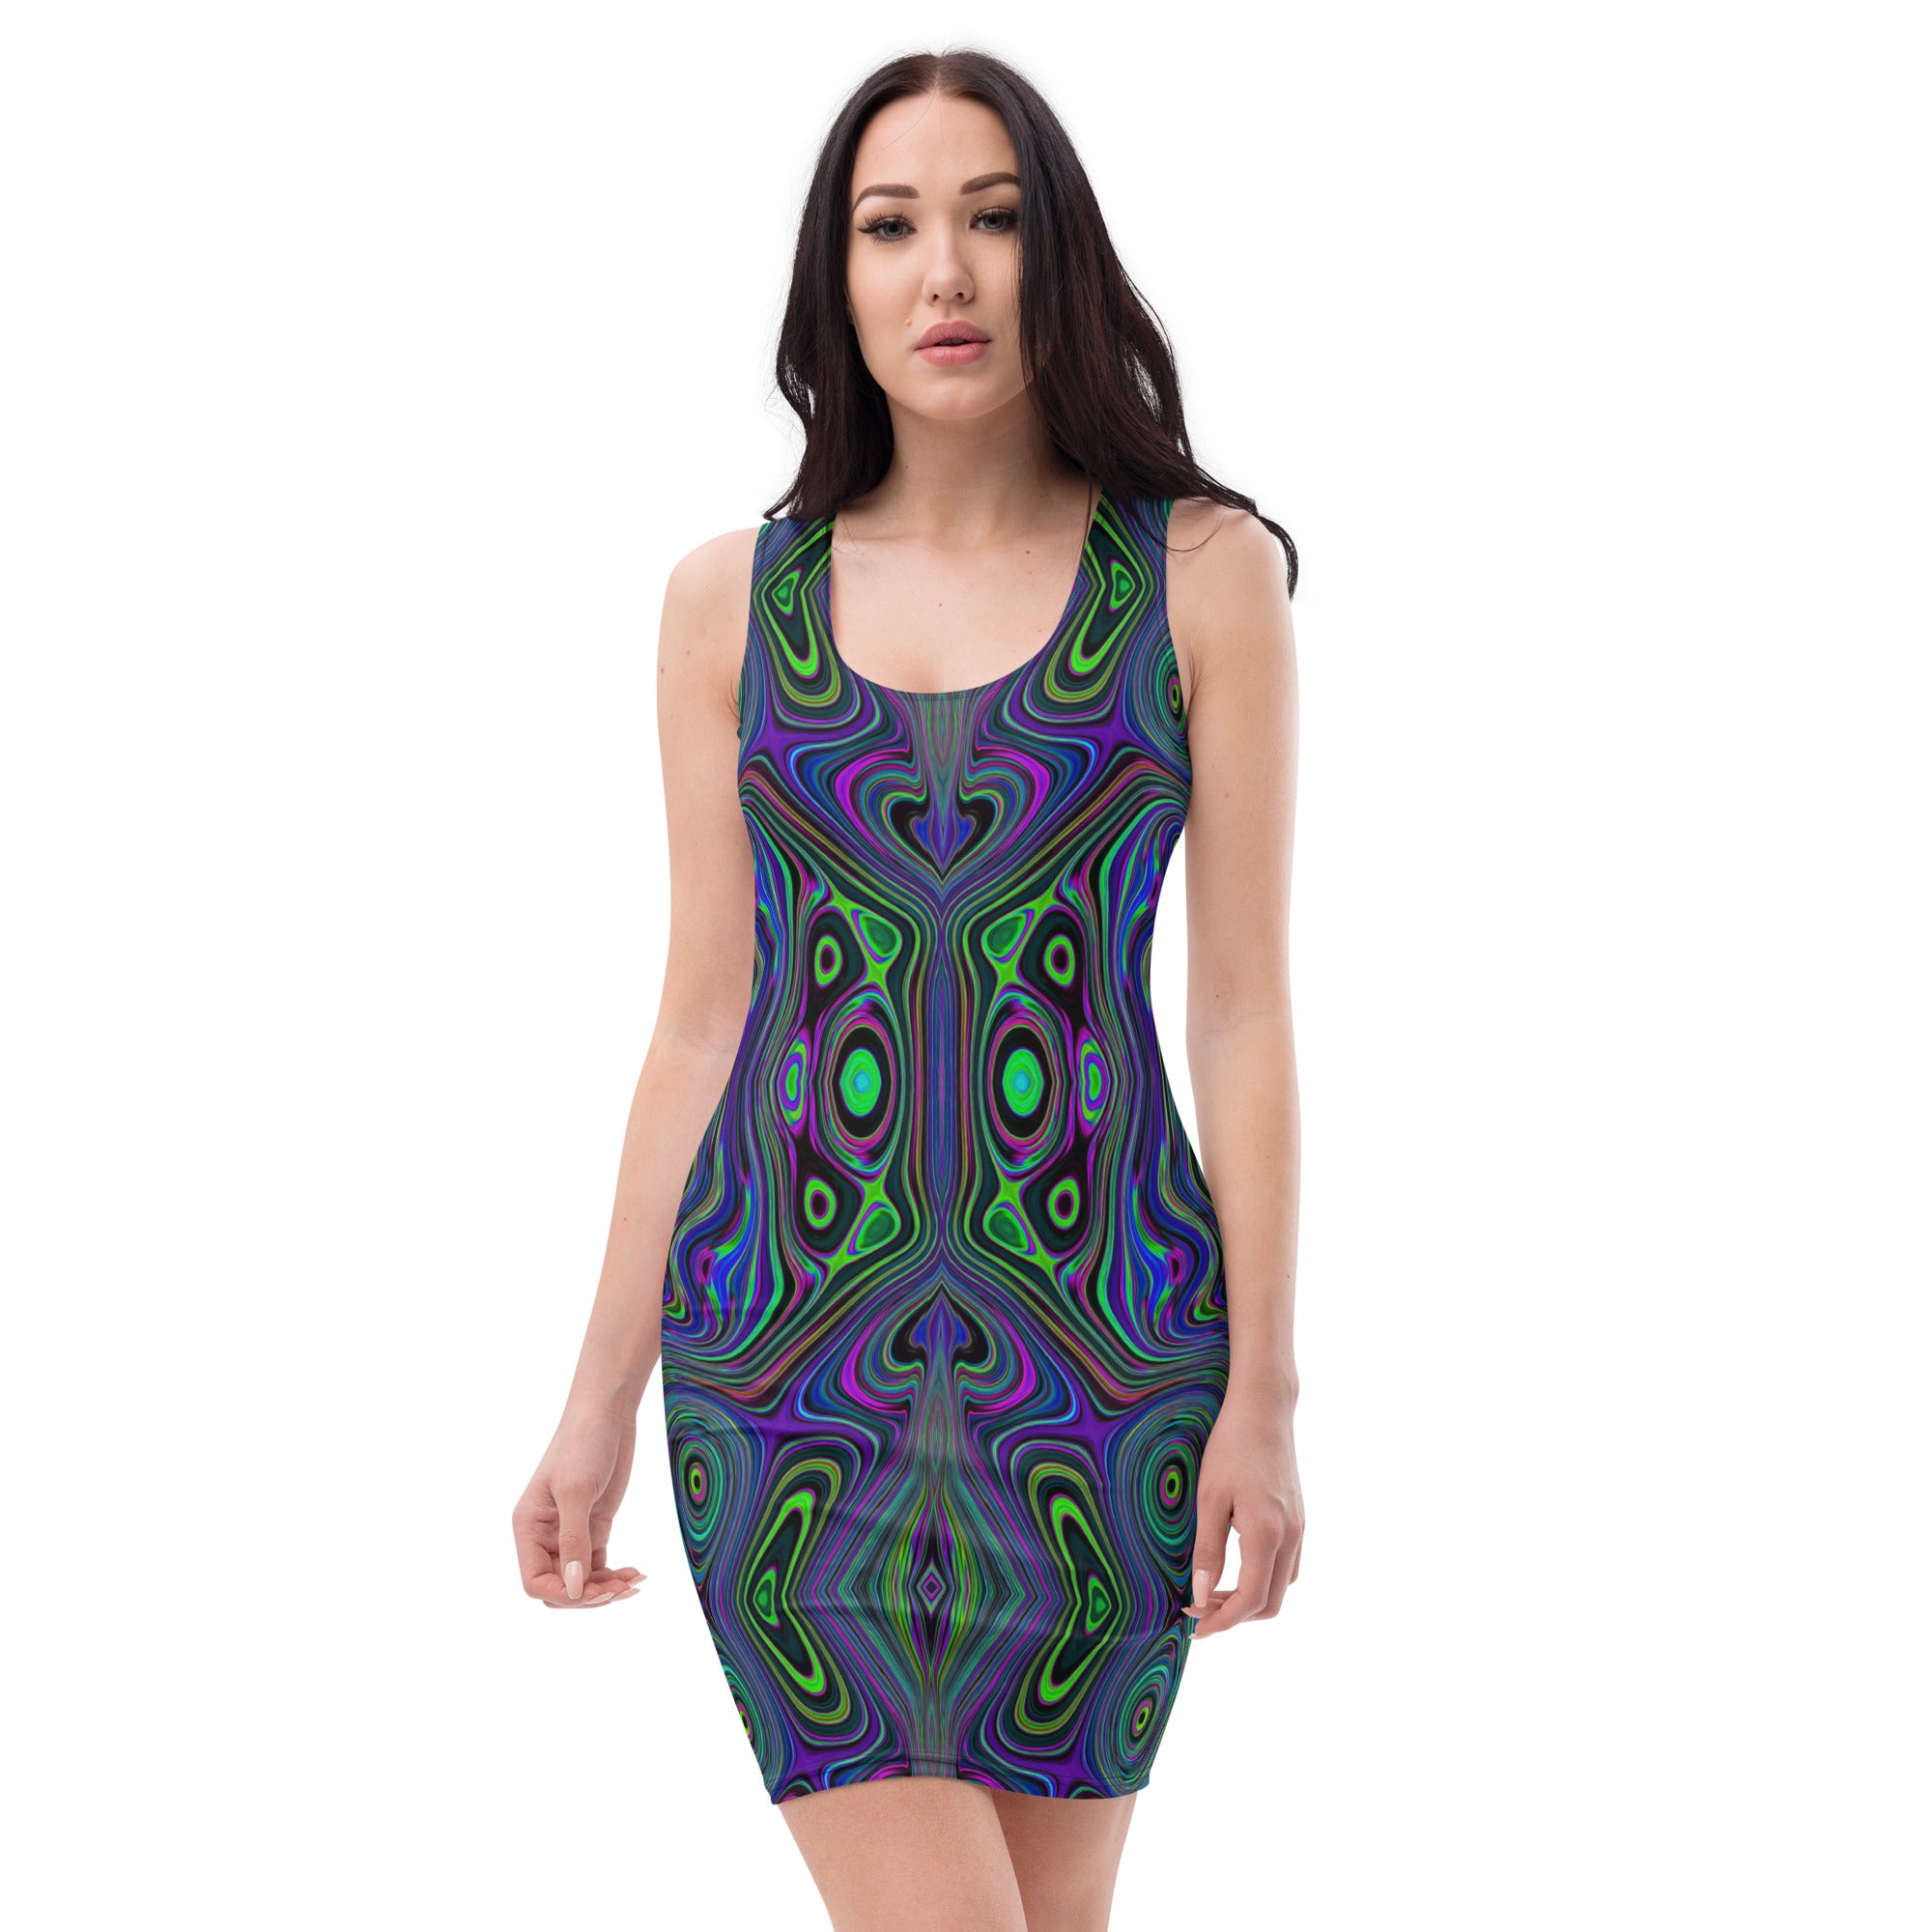 Bodycon Dress, Trippy Retro Royal Blue and Lime Green Abstract